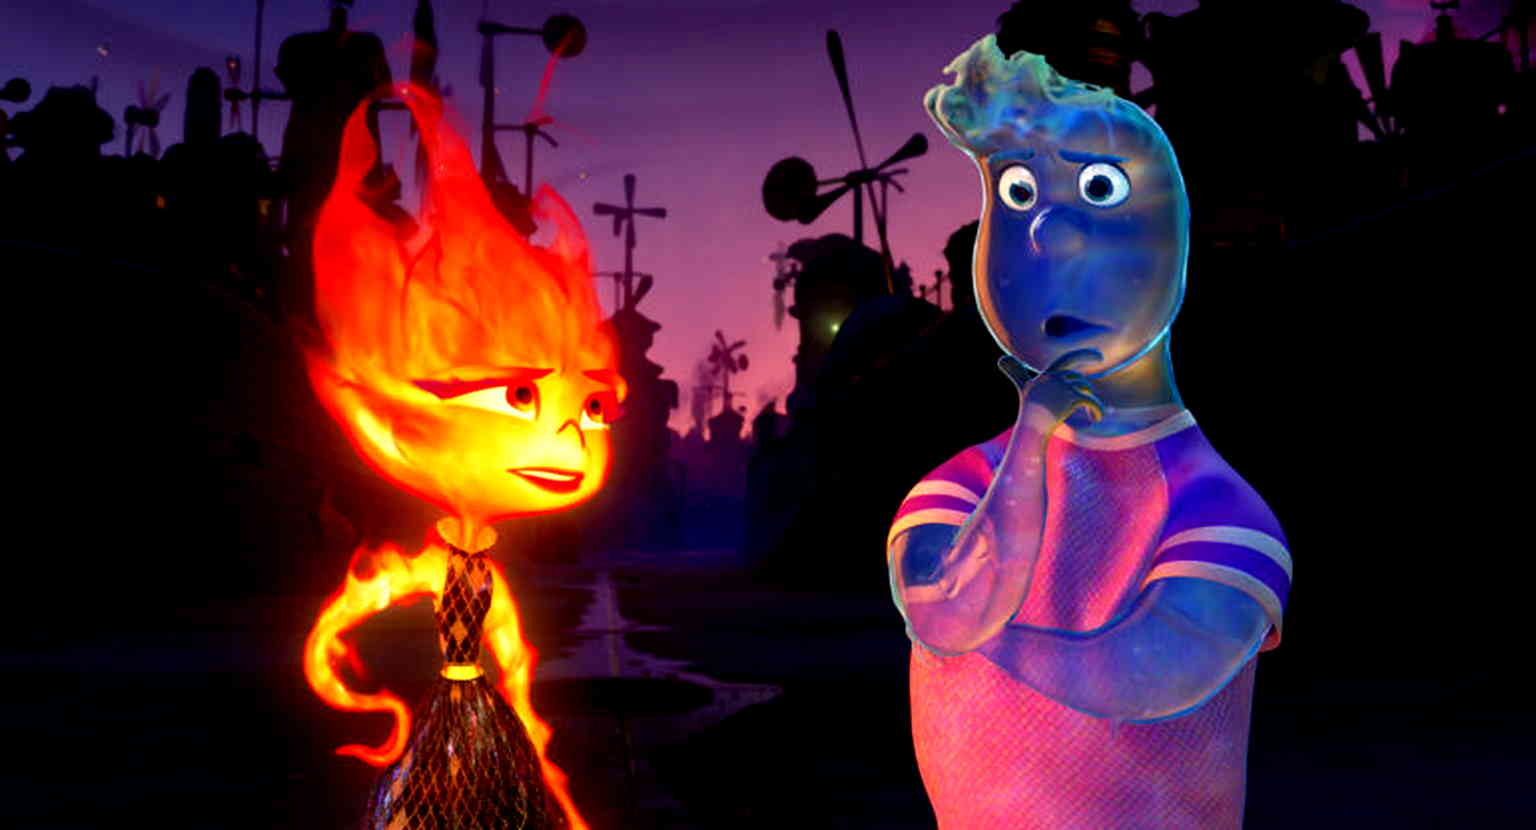 ‘Elemental’ filmmakers, actors reflect on the 7-year journey to complete Pixar’s latest film